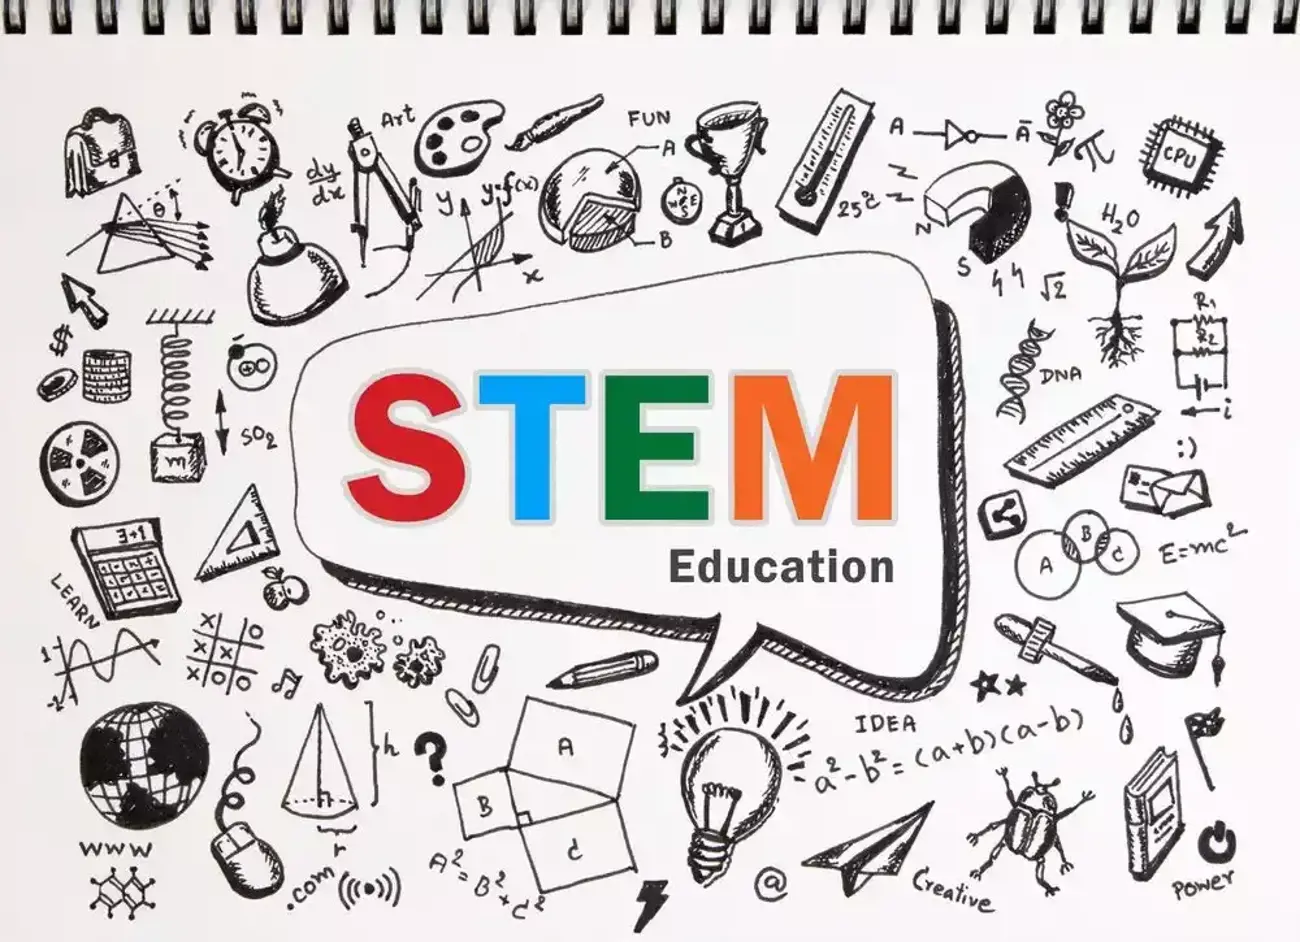 Blog Image for article A new and fun way for educators to teach young children STEM